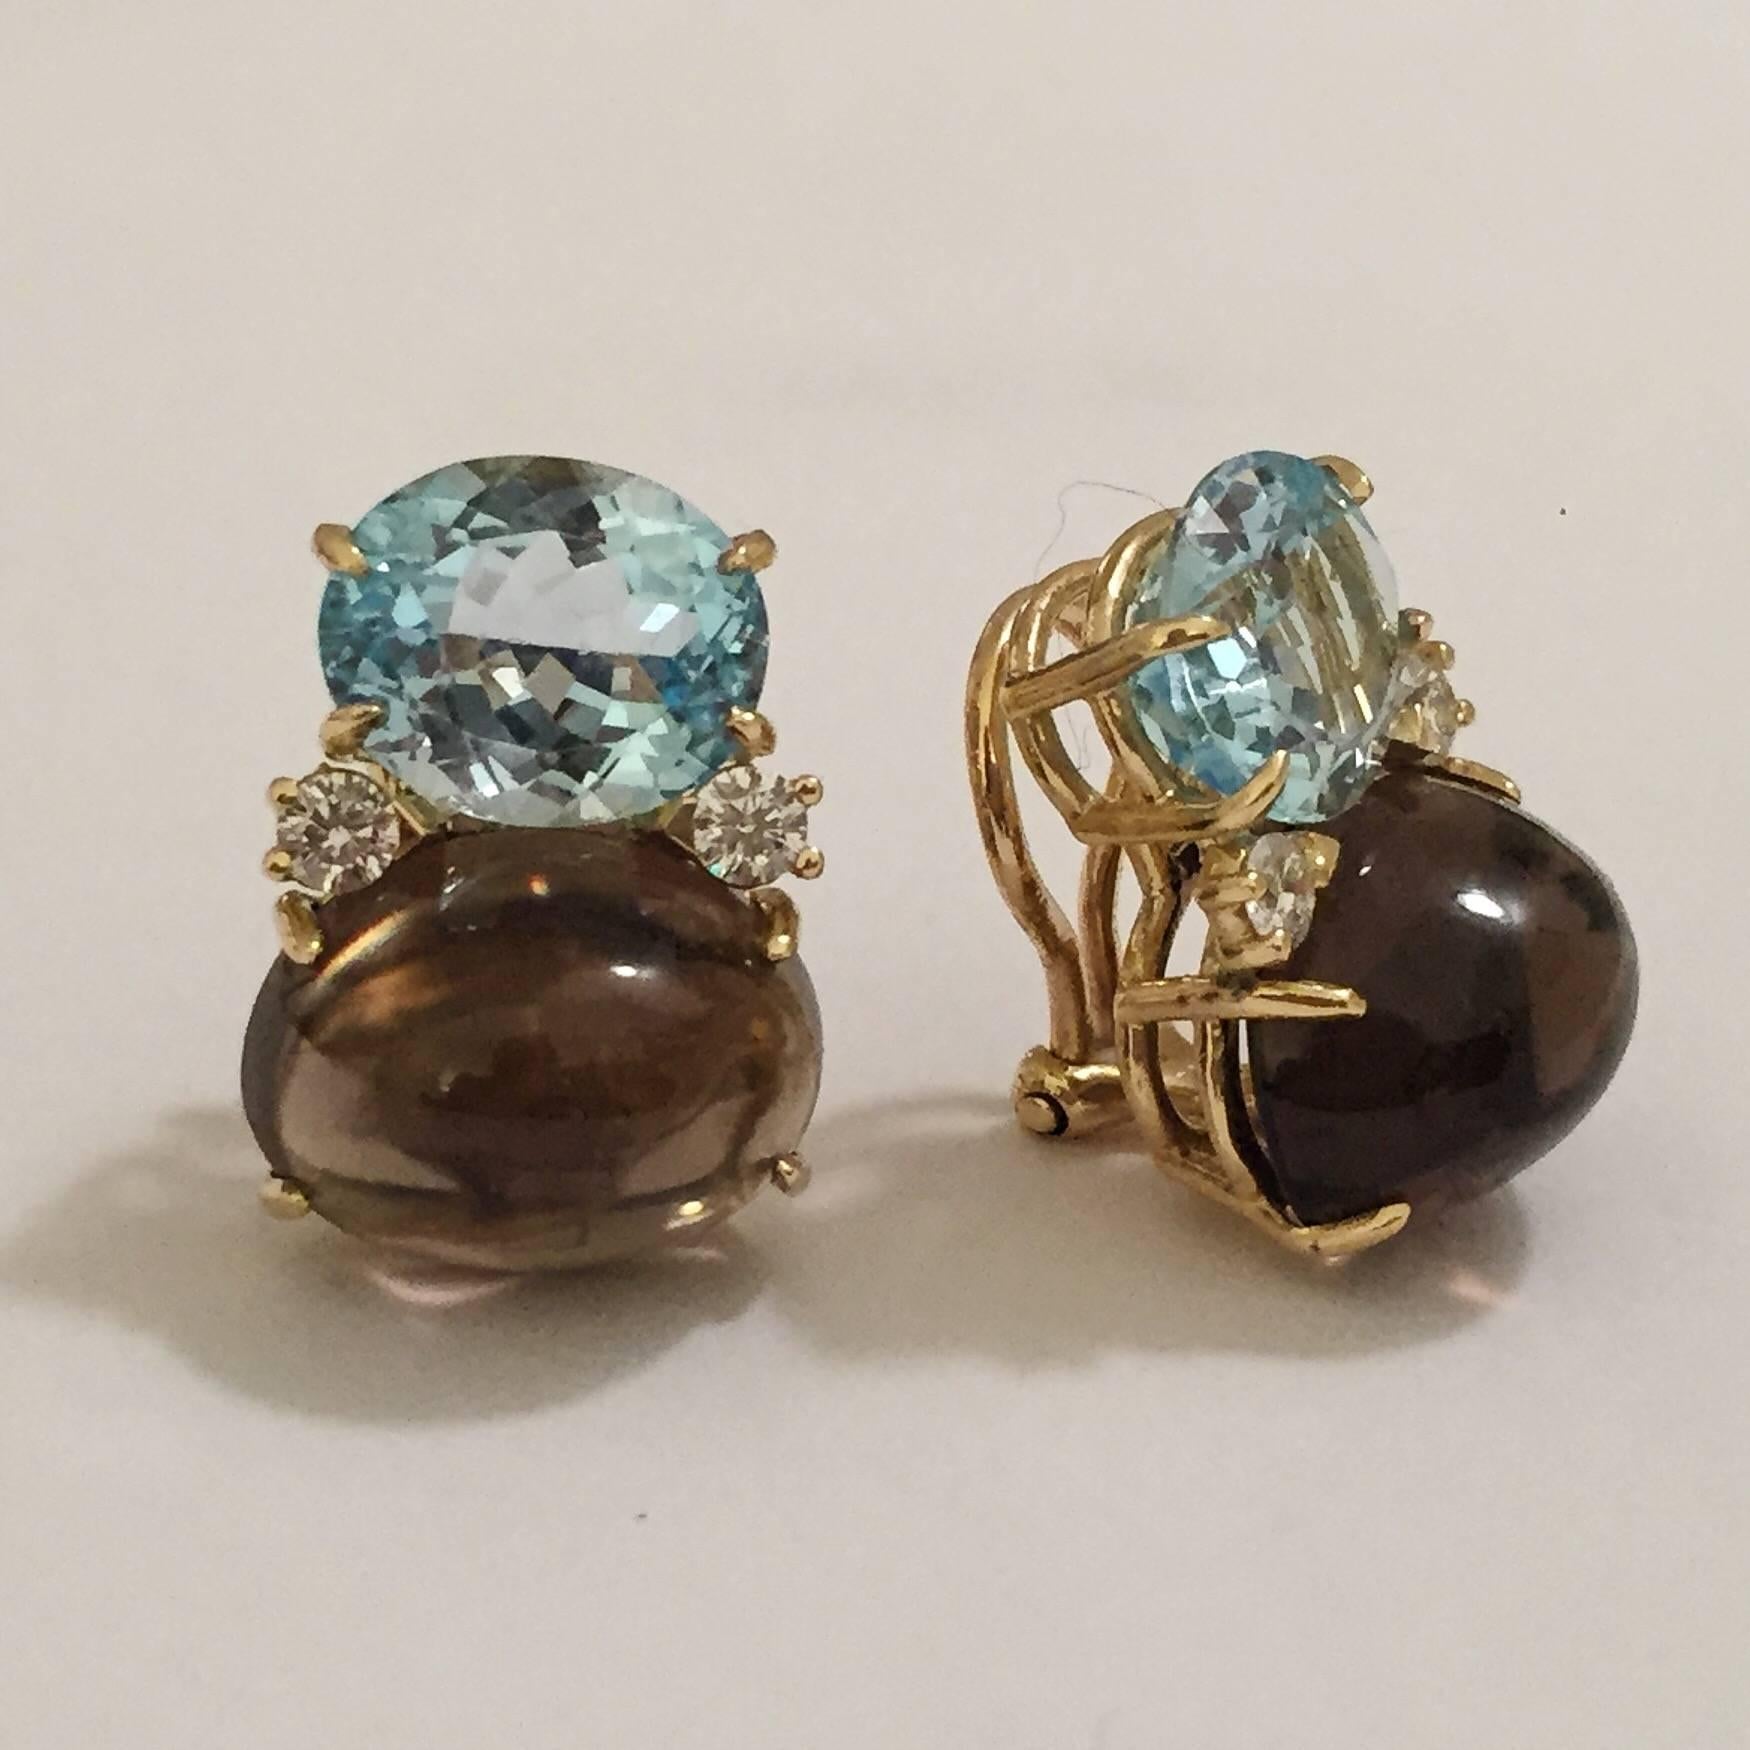 18kt Yellow Gold Large GUM DROP™ Earrings with faceted Blue Topaz and Cabochon Smokey Topaz and diamonds.  

The Blue Topaz is approximately 5 cts each and the Cabochon Smokey Topaz is approximately 12 cts each, and 4 diamonds weighing